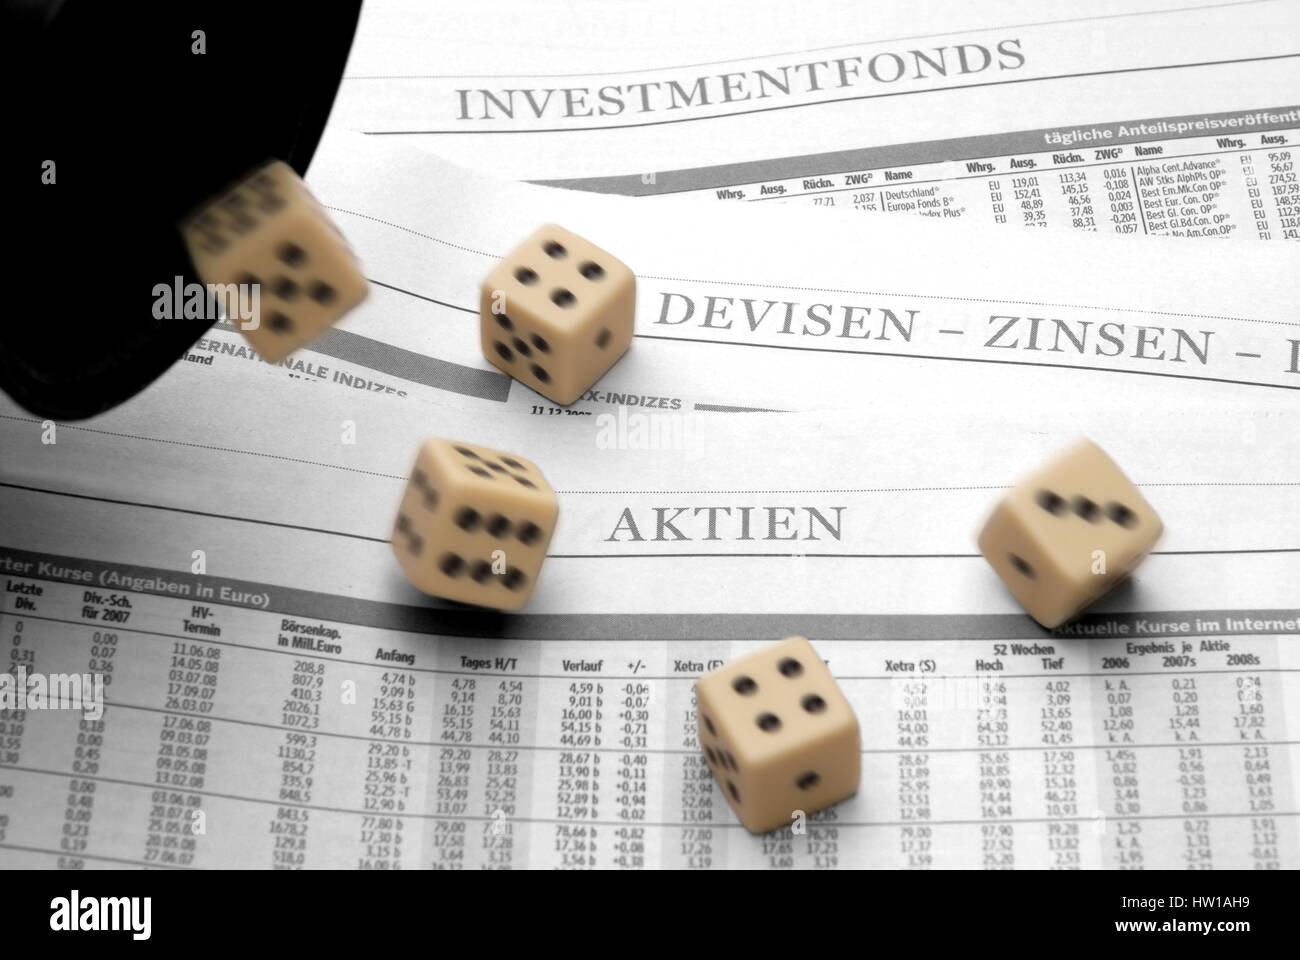 Investments in 2008, Investitionen 2008 Stock Photo